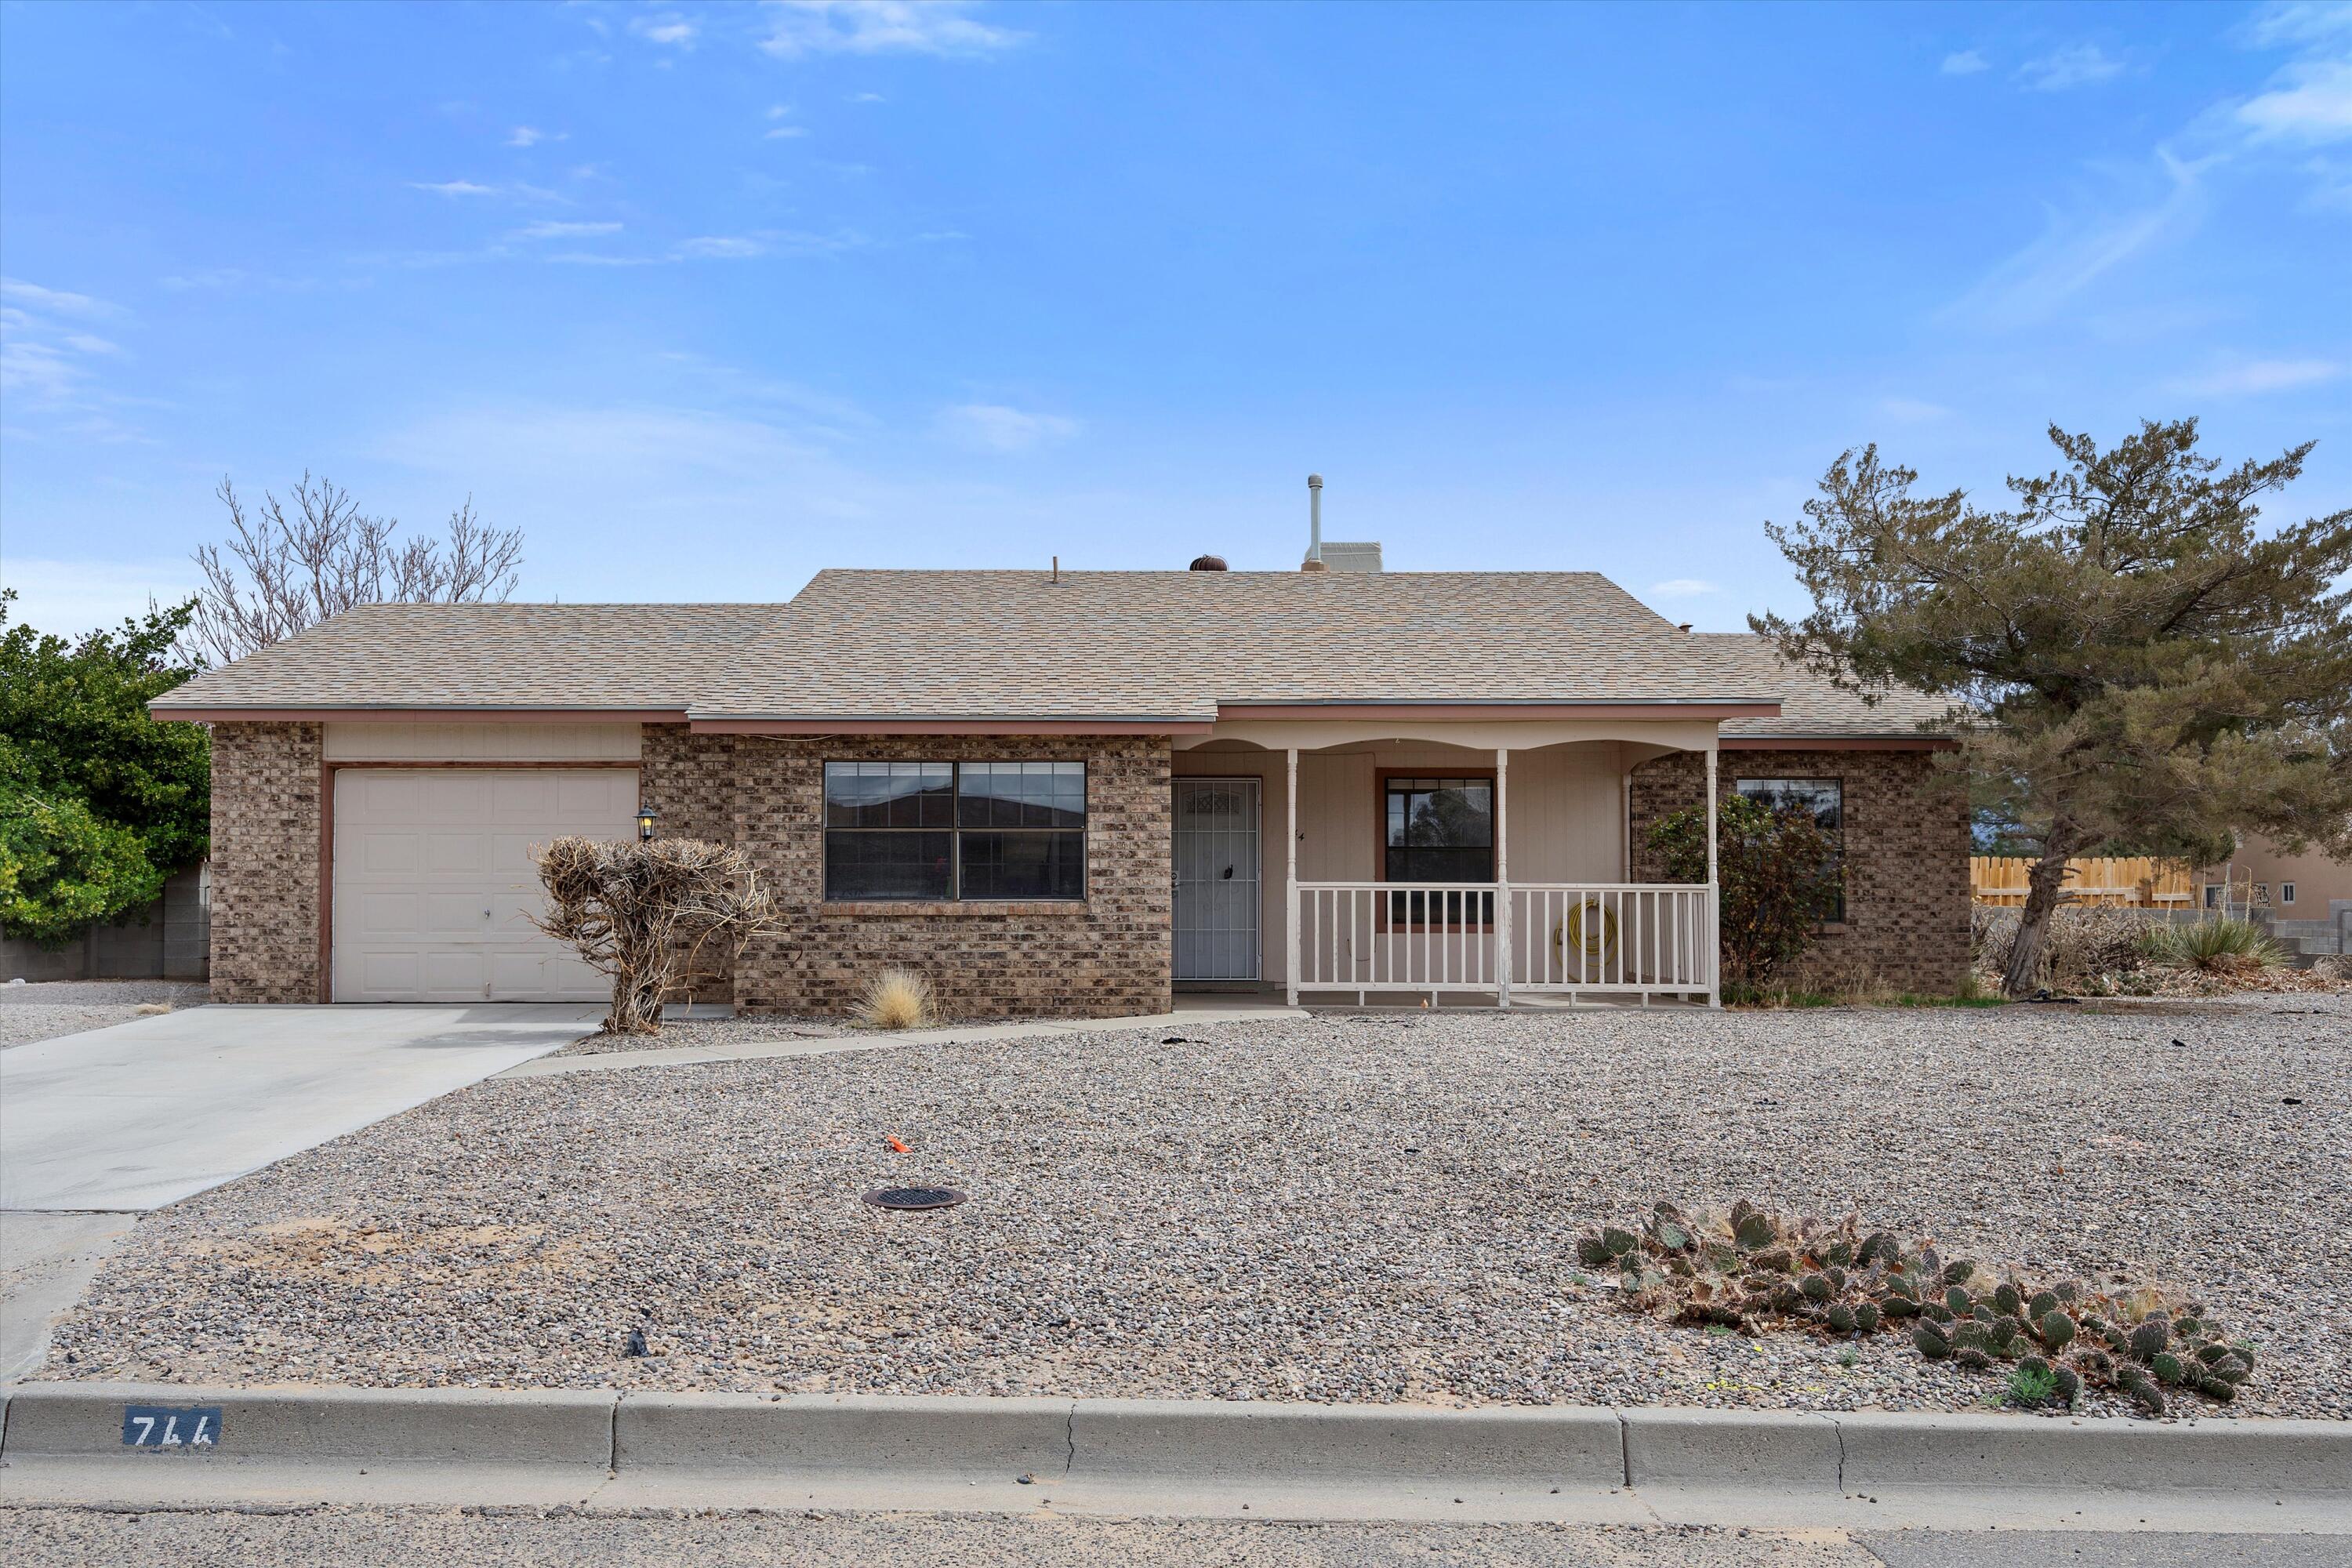 744 Stagecoach Road SE, Rio Rancho, New Mexico 87124, 3 Bedrooms Bedrooms, ,2 BathroomsBathrooms,Residential,For Sale,744 Stagecoach Road SE,1059112